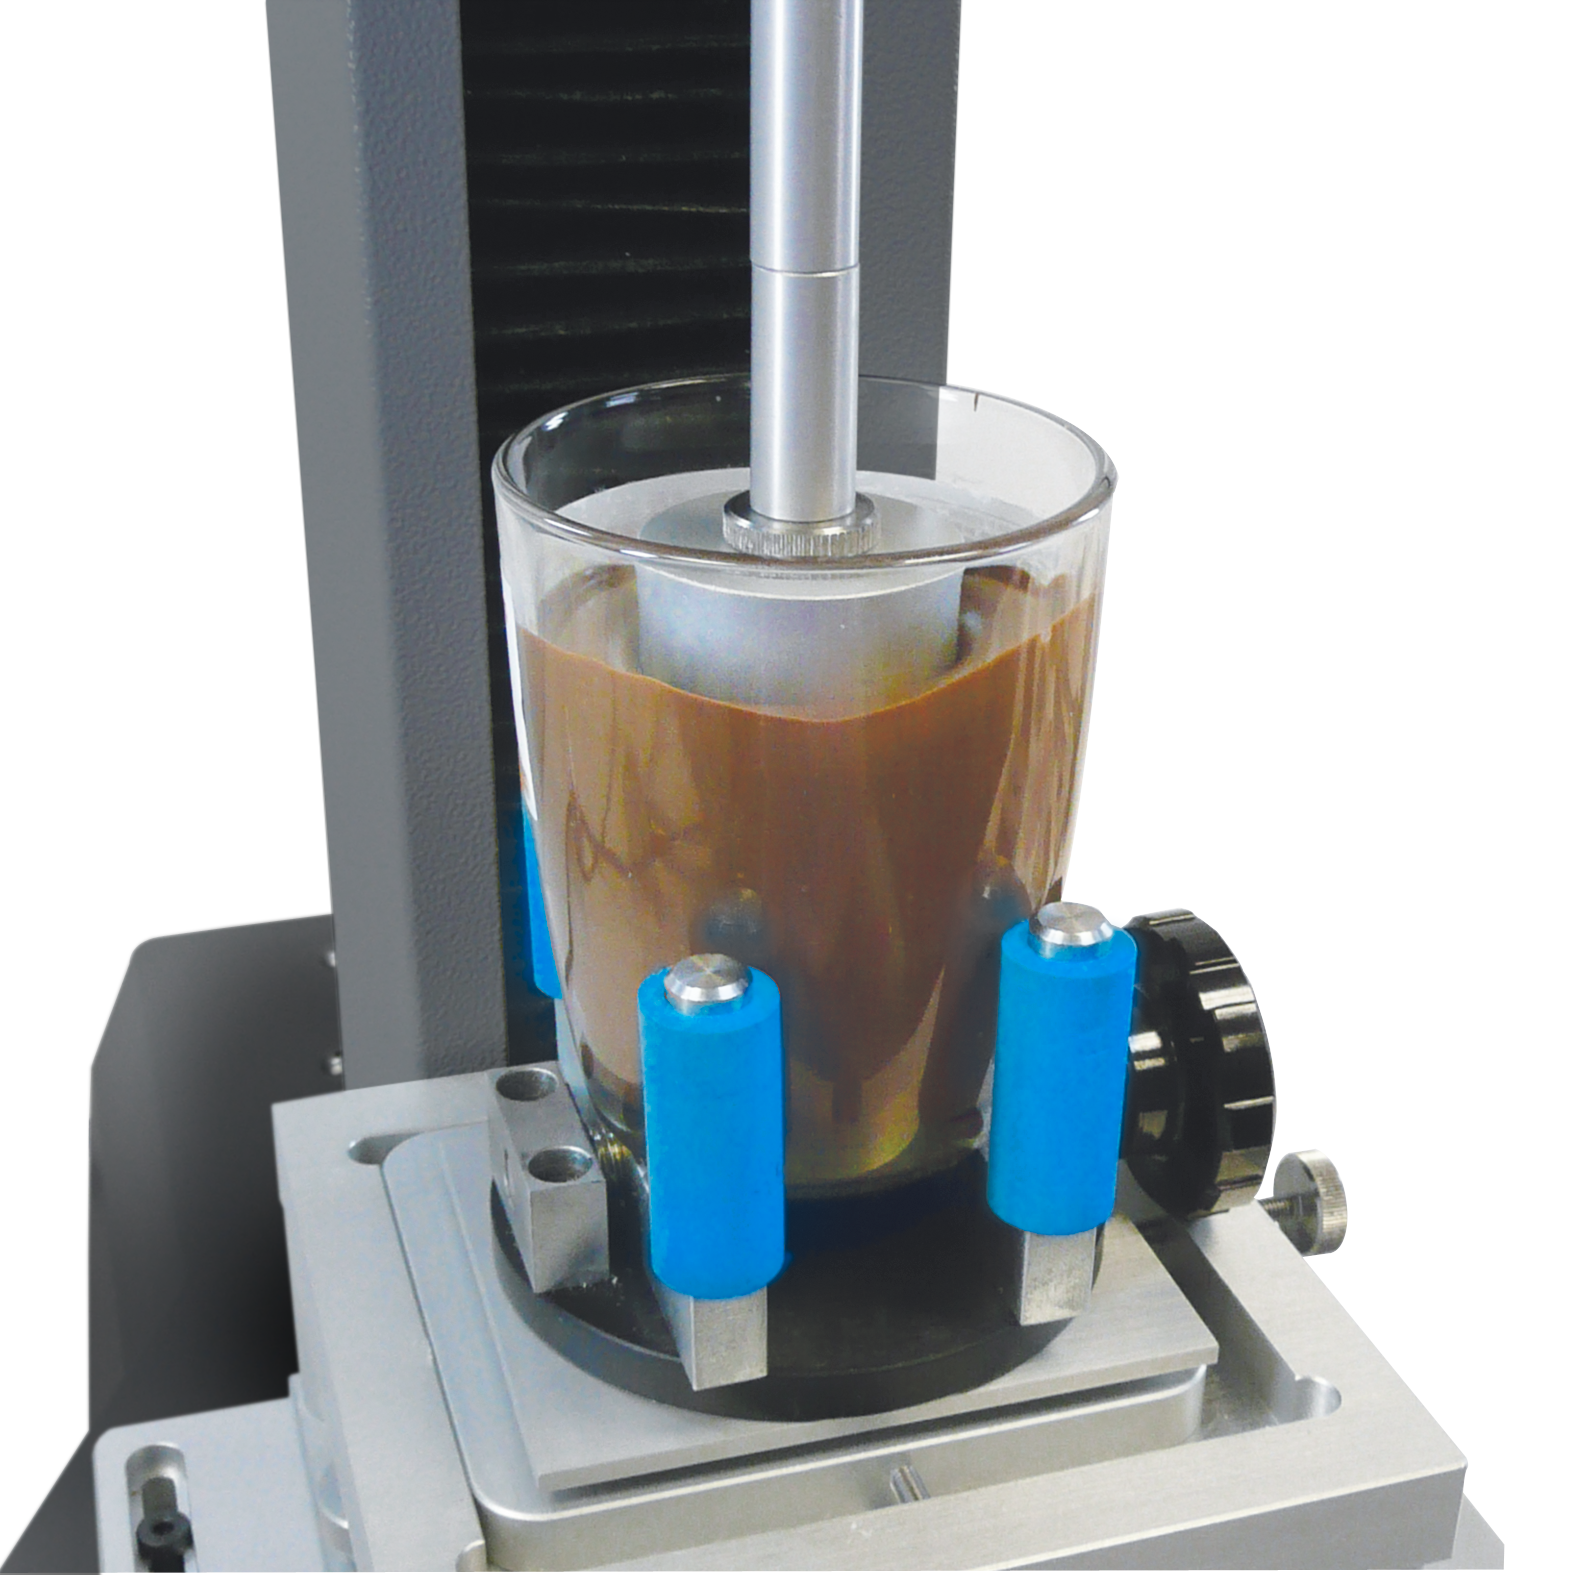 Chocolate spread consistency being tested with a back extrusion texture analysis probe